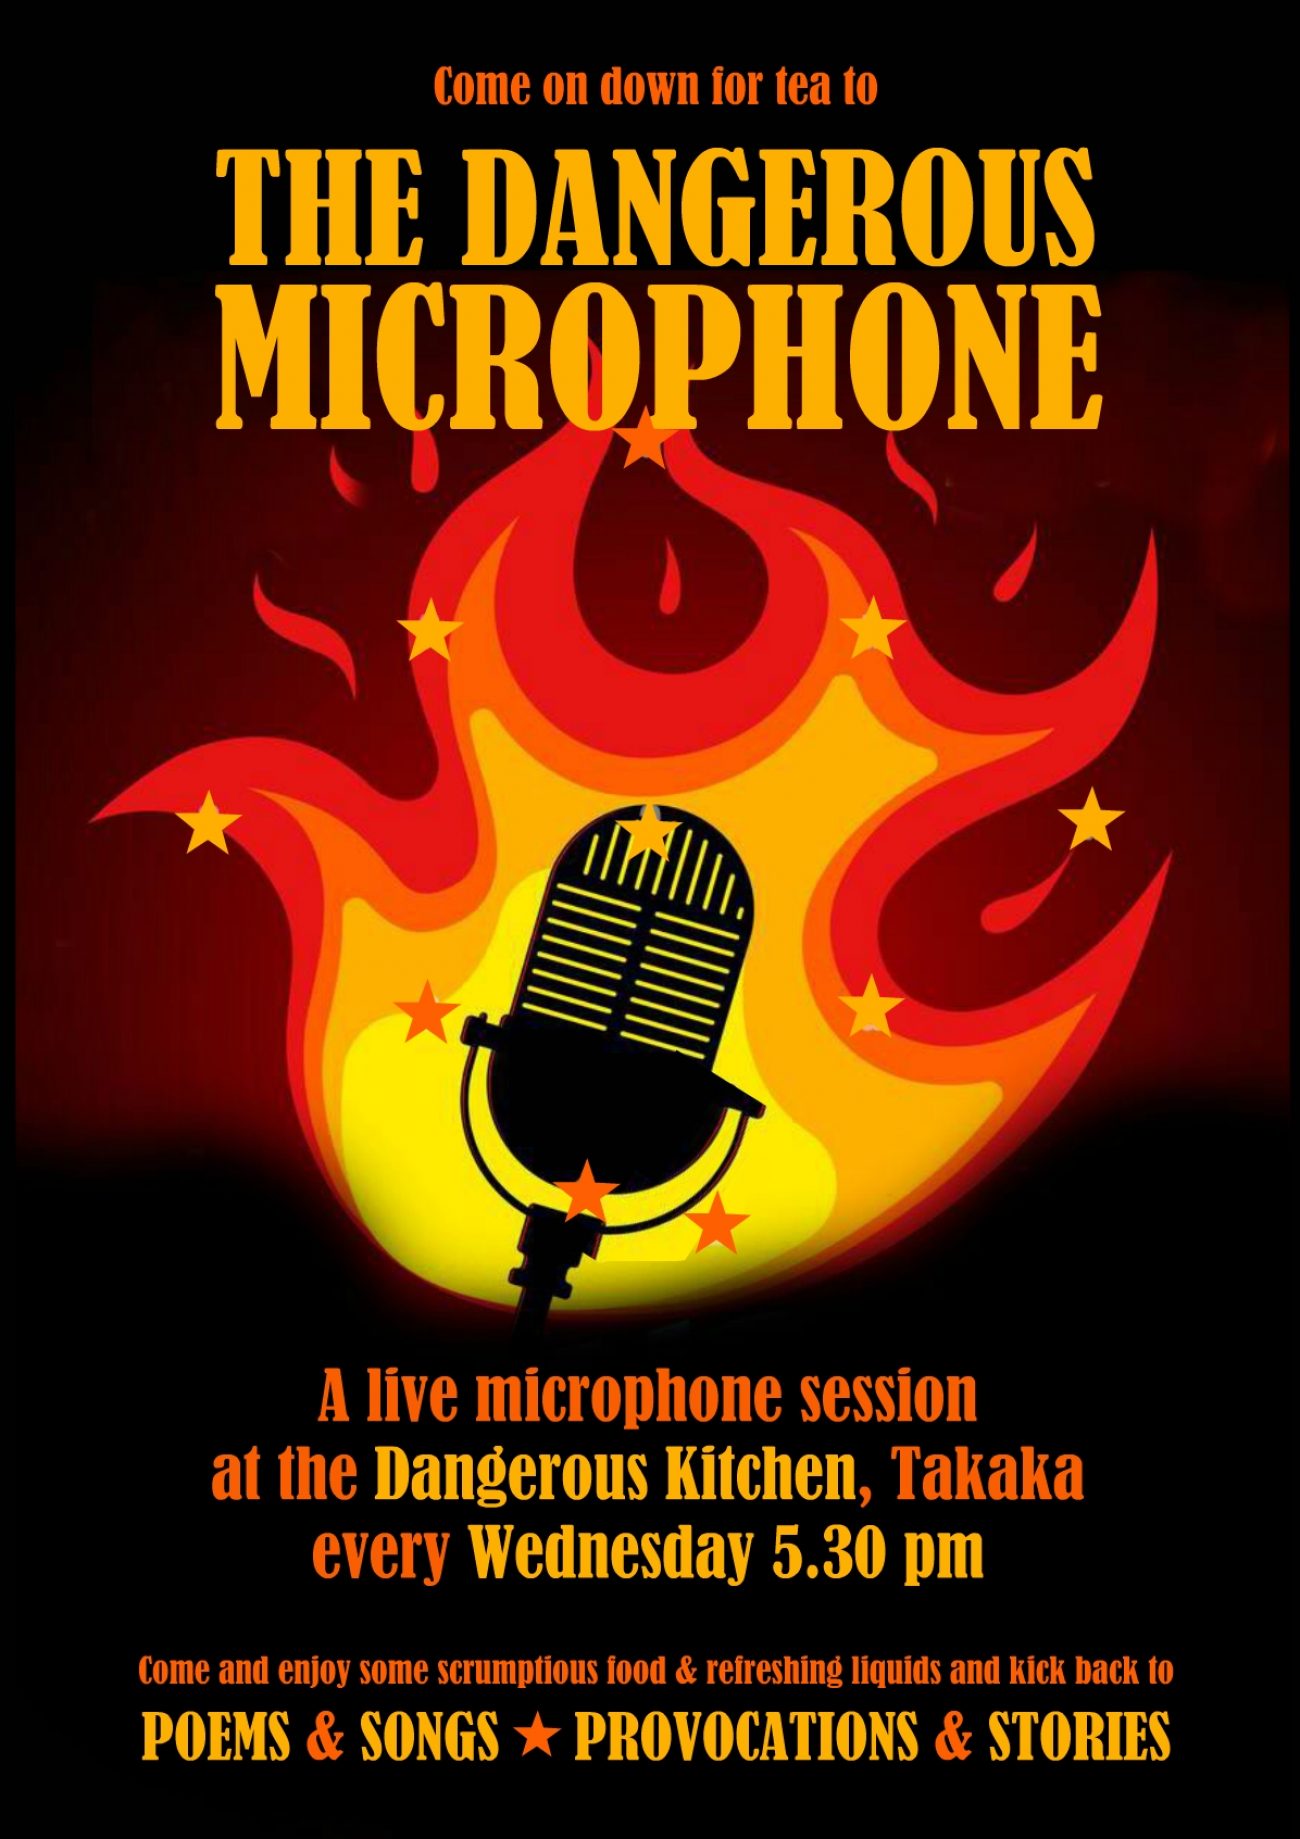 THE DANGEROUS MICROPHONE